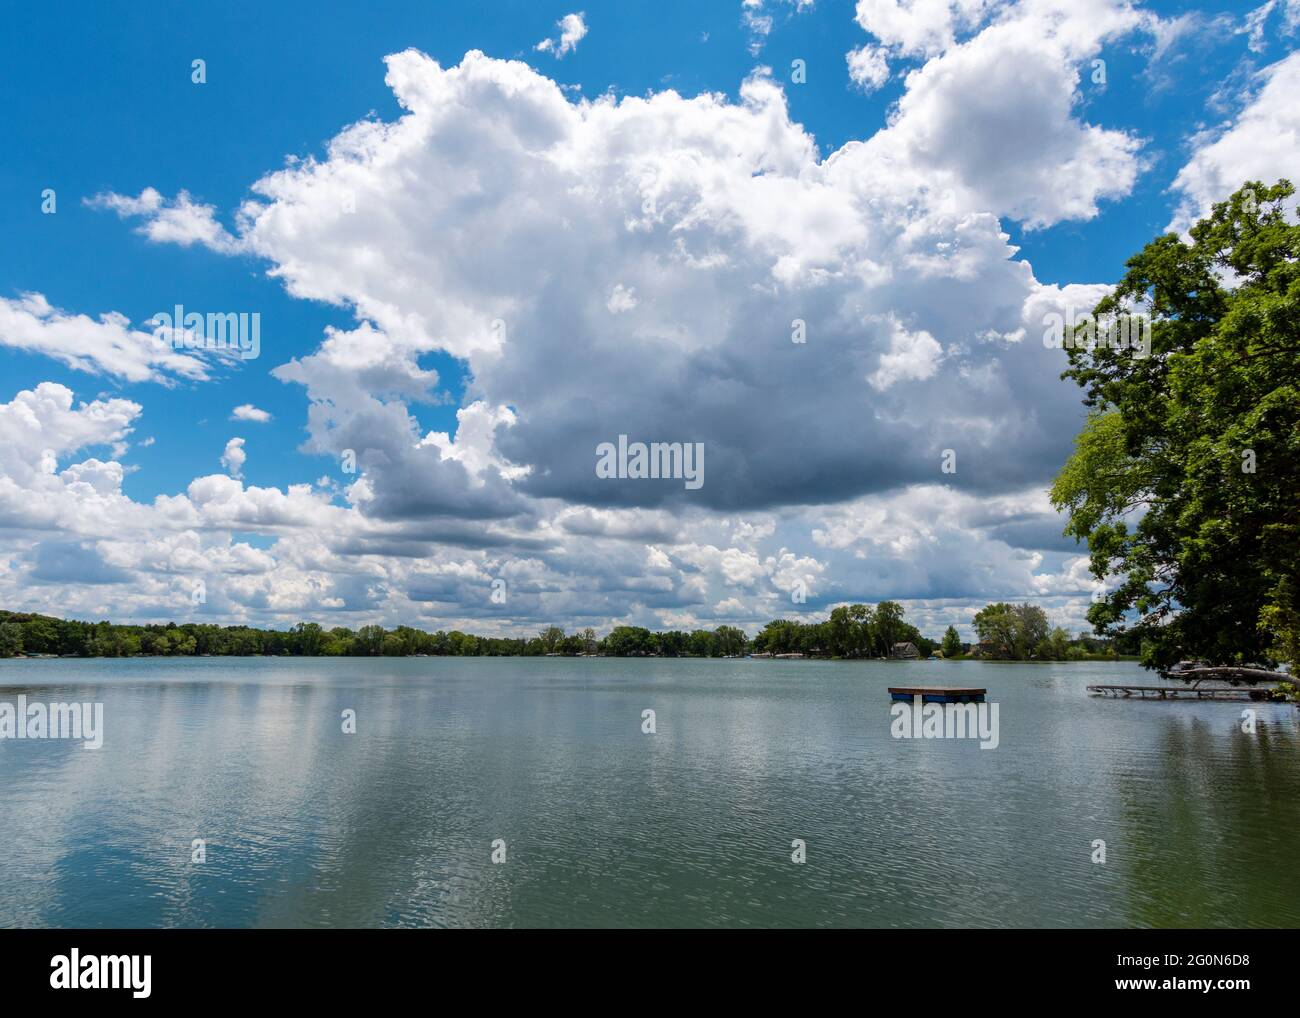 A landscape crop of a Wisconsin Lake (Lower Genesee Lake in Waukesha County).  A swimming raft floats on the calm waters while cumuls clouds are refle Stock Photo